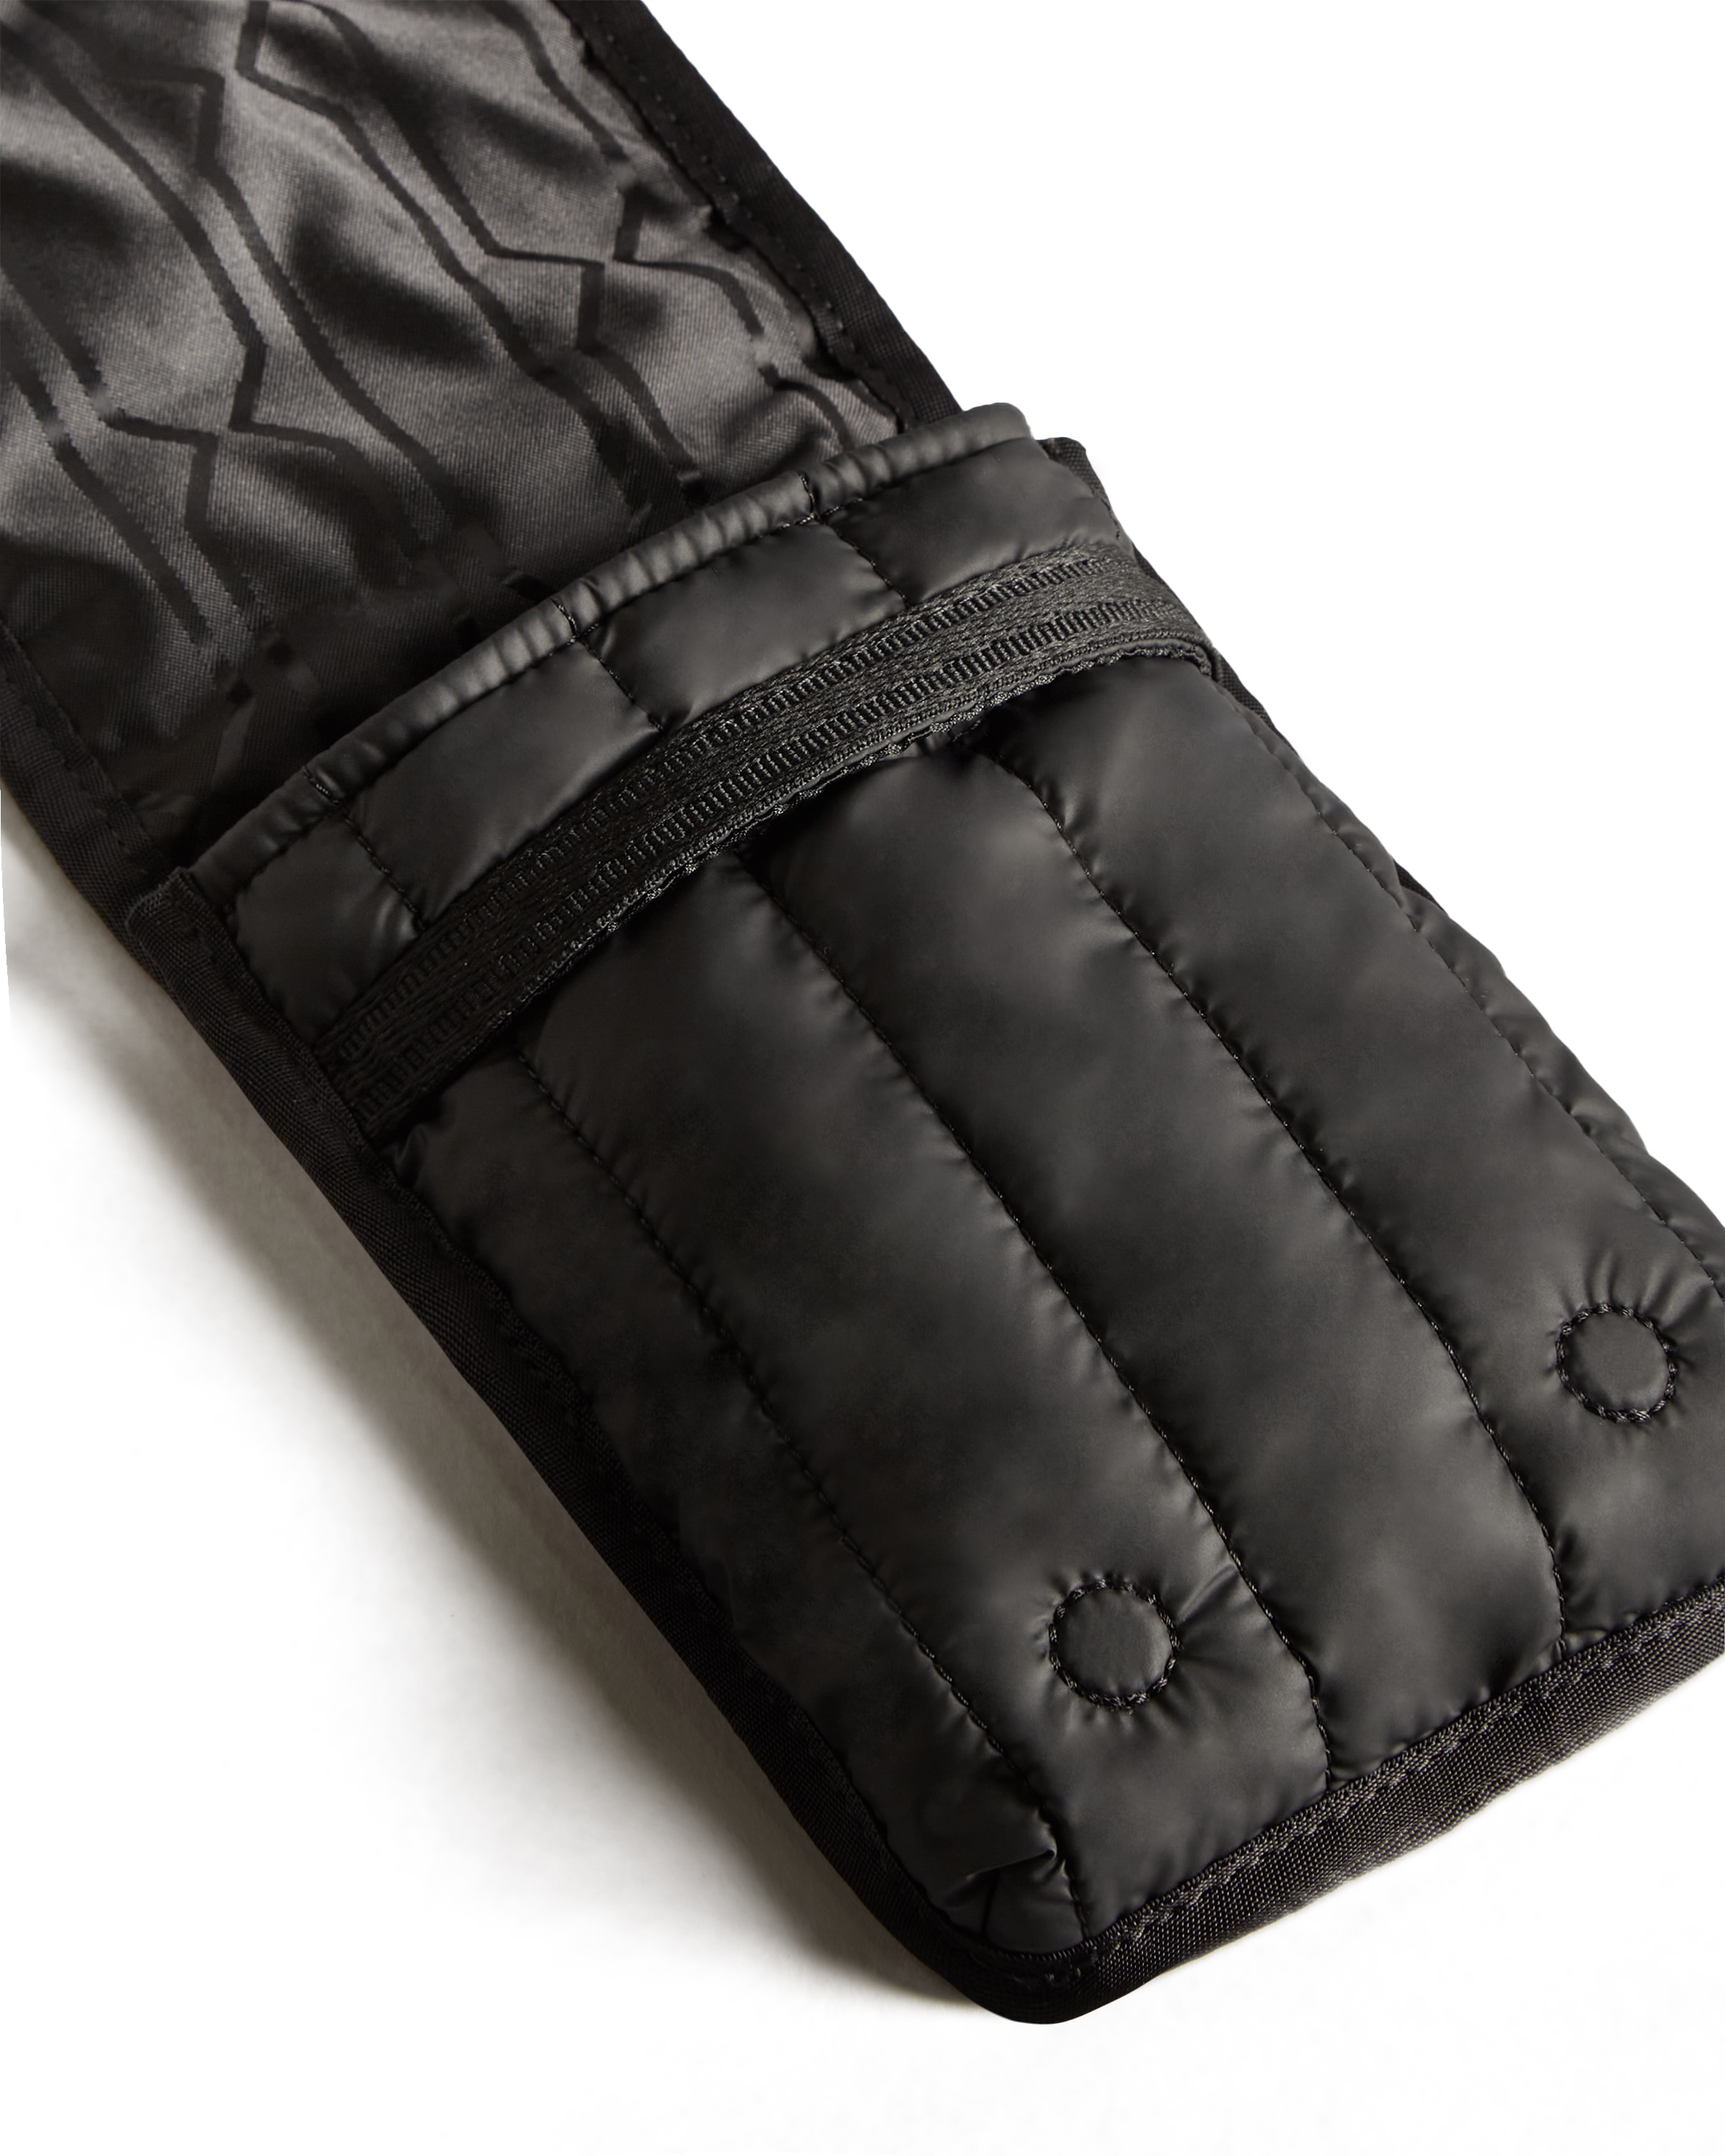 INTREPID PUFFER ESSENTIAL PHONE POUCH|HUNTER(ハンター)の通販